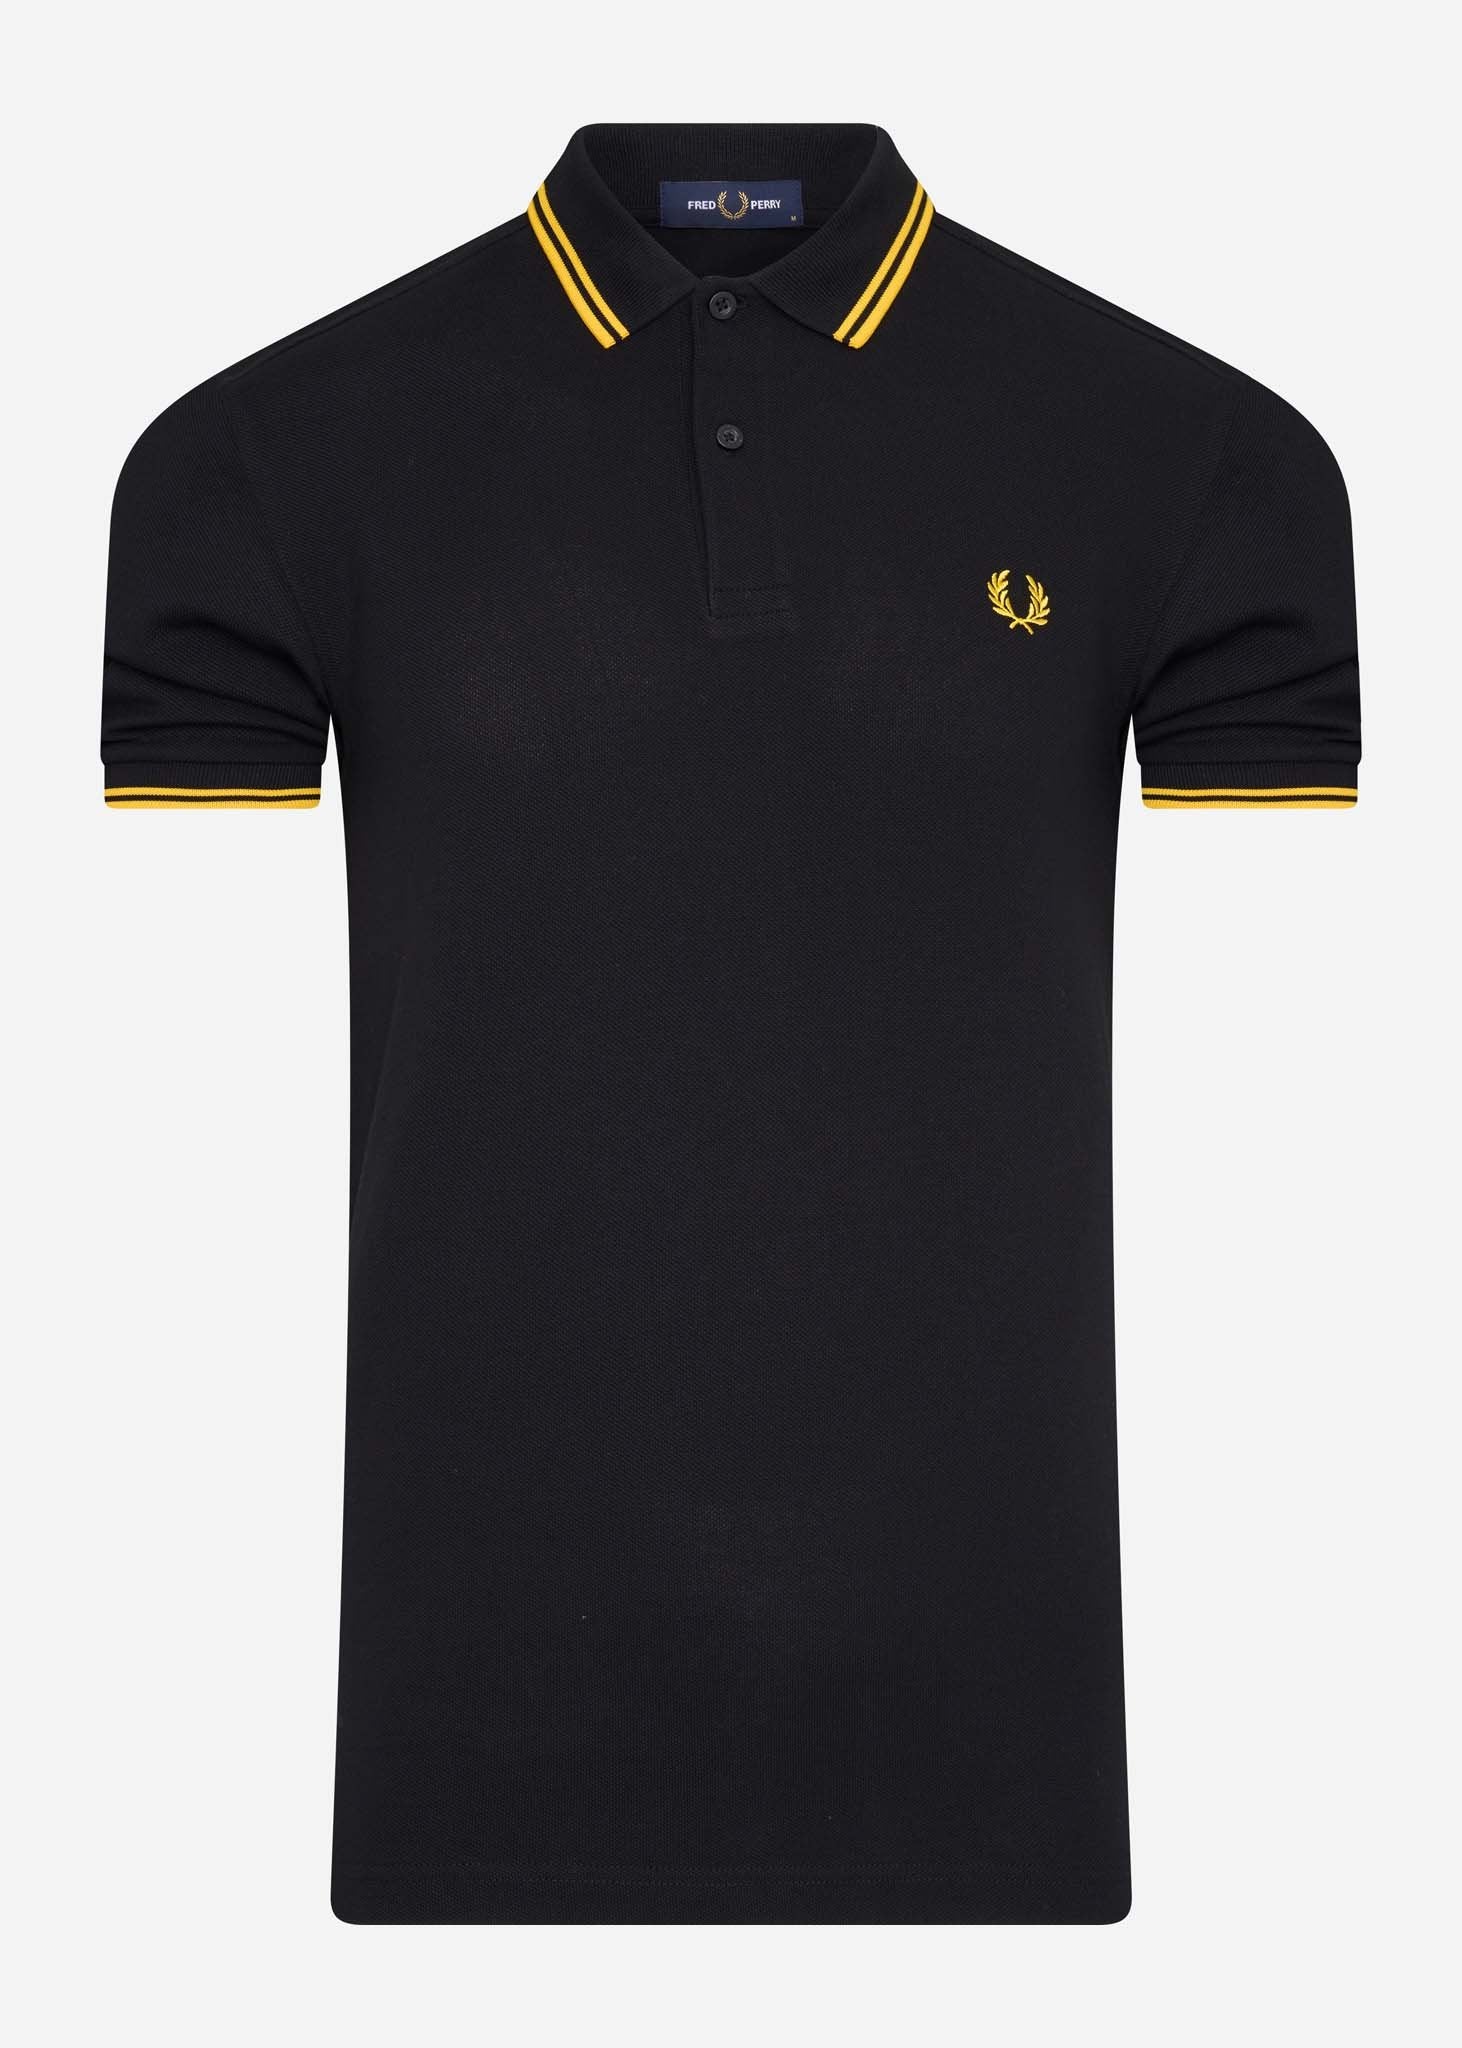 fred perry polo black yellow